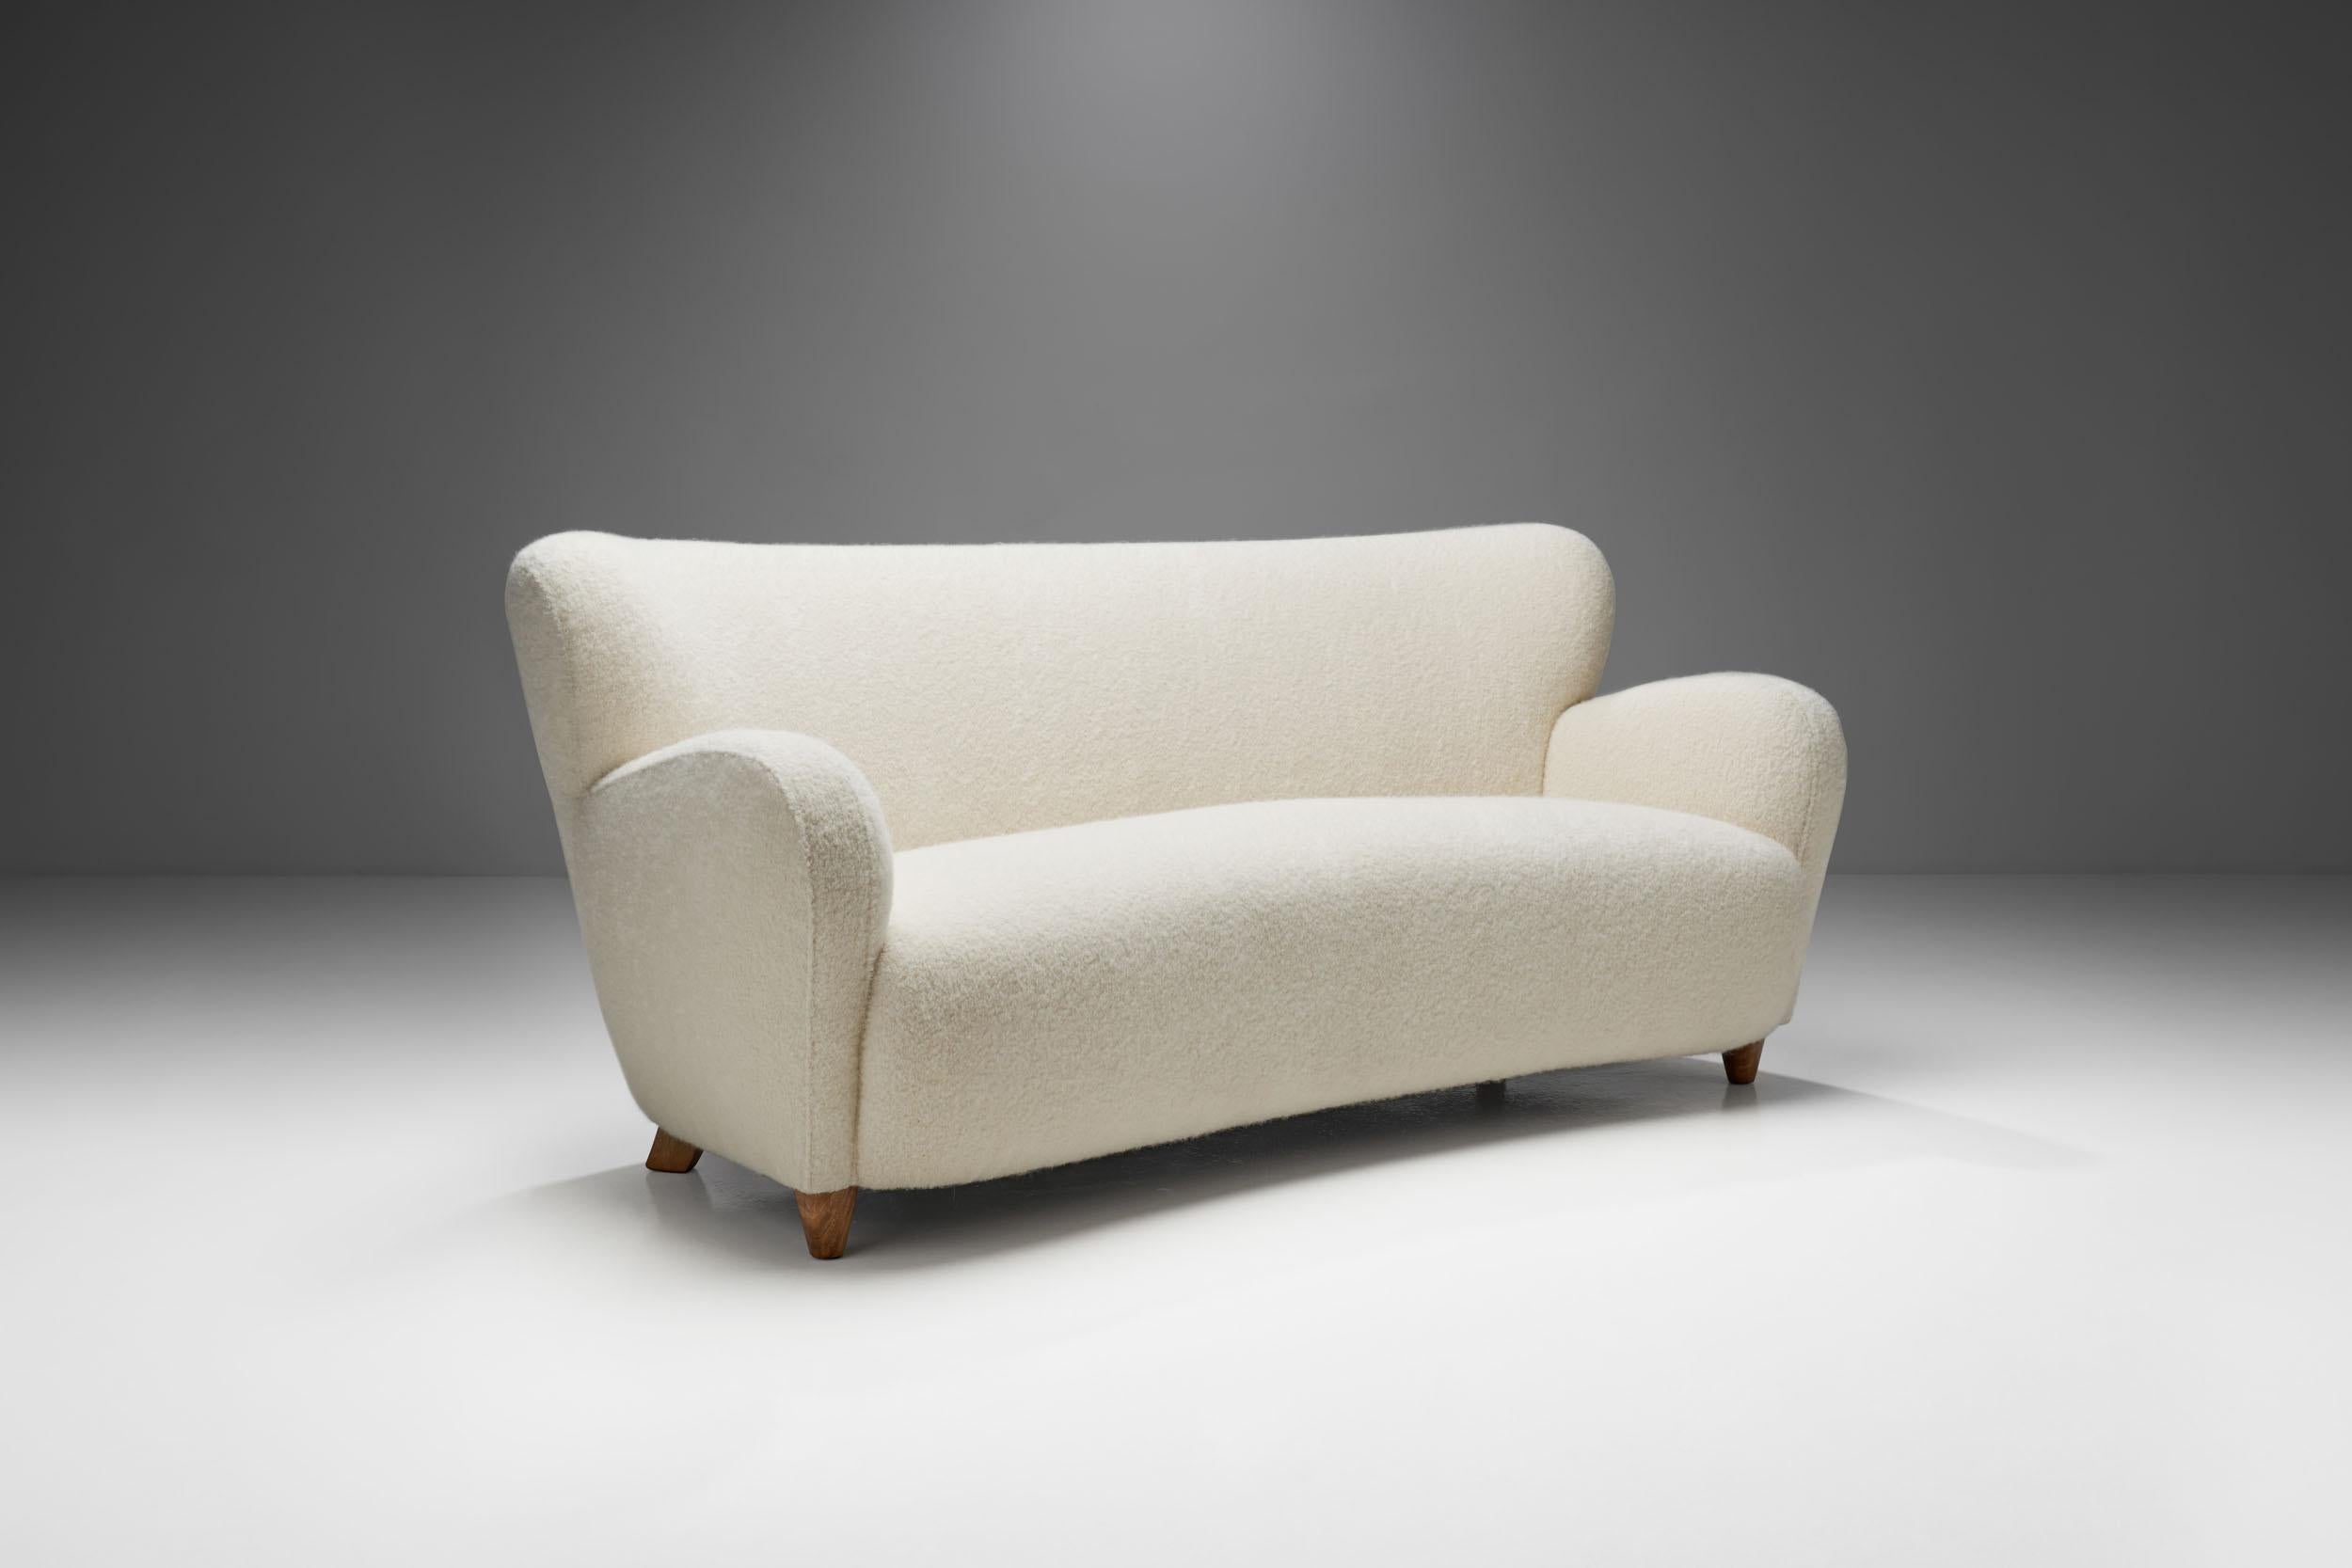 The Nordic perspective on cabinetmaking is exceptional, and Finland is no exception, quite the opposite. Wood is omnipresent in the Nordics, and Finnish woodworking is world-famous for its traditions.

This three-seat sofa is immensely elegant,